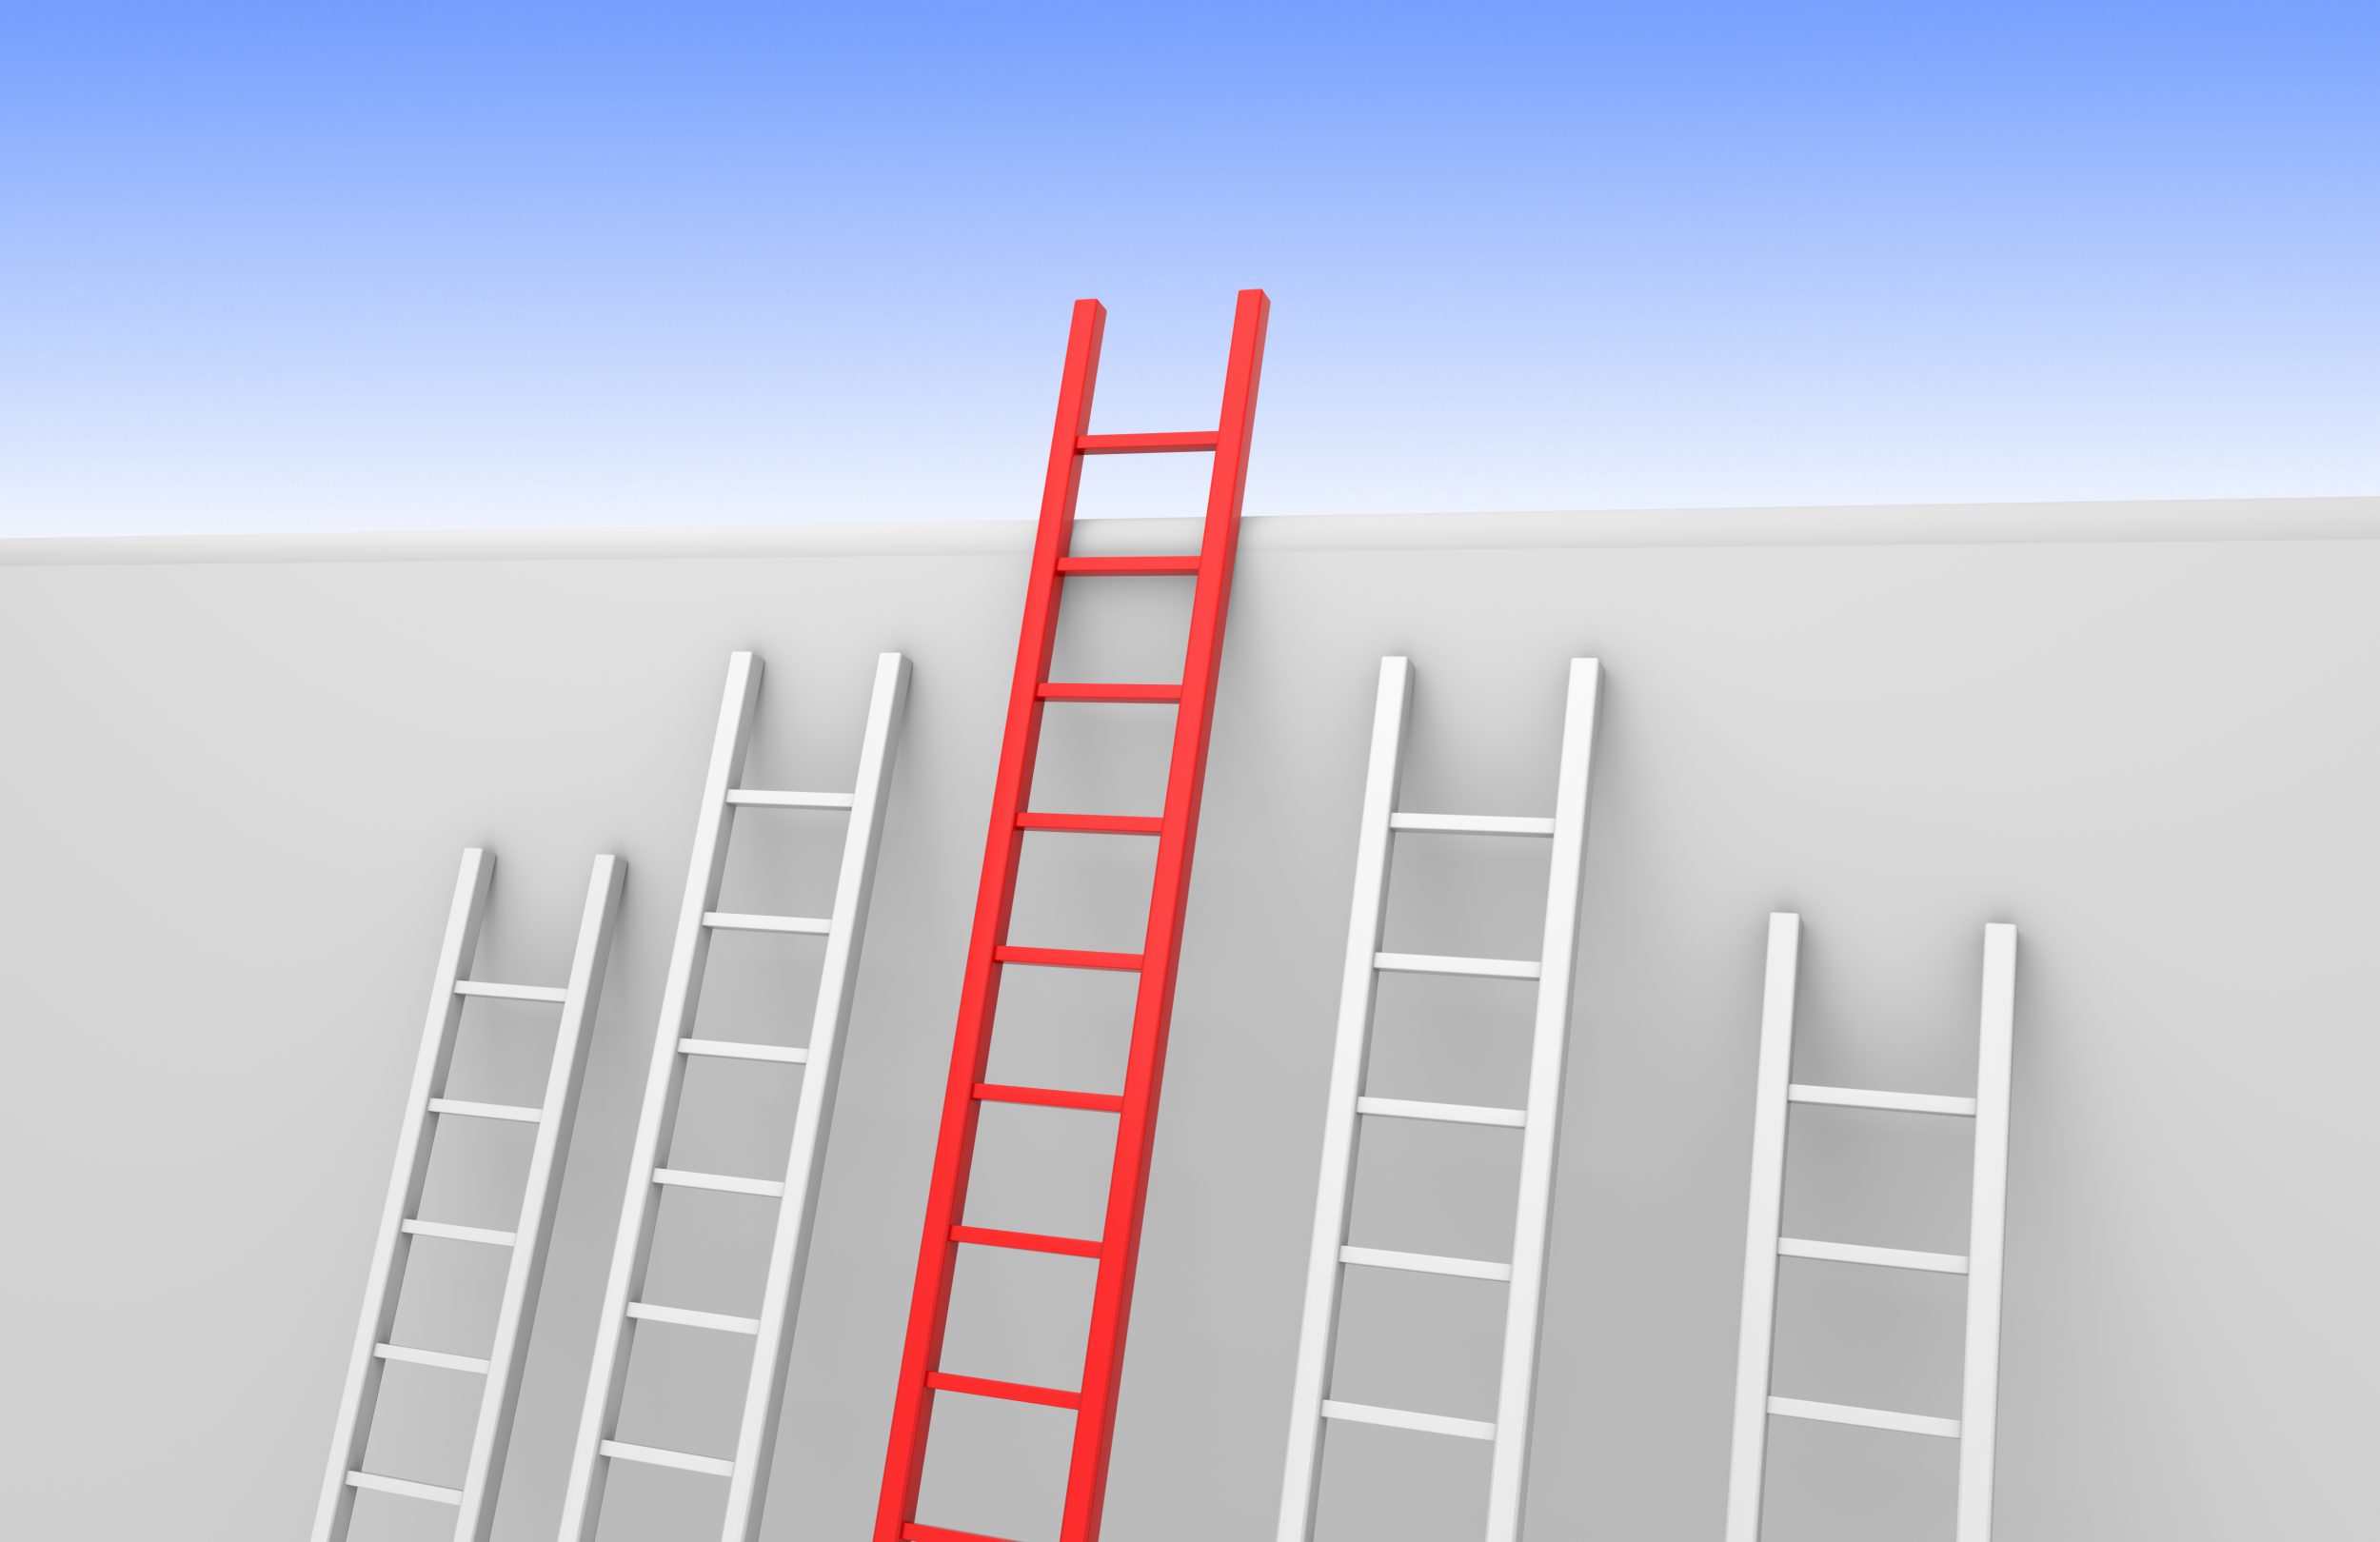 Five ladders leaning against a wall, one reaches the top